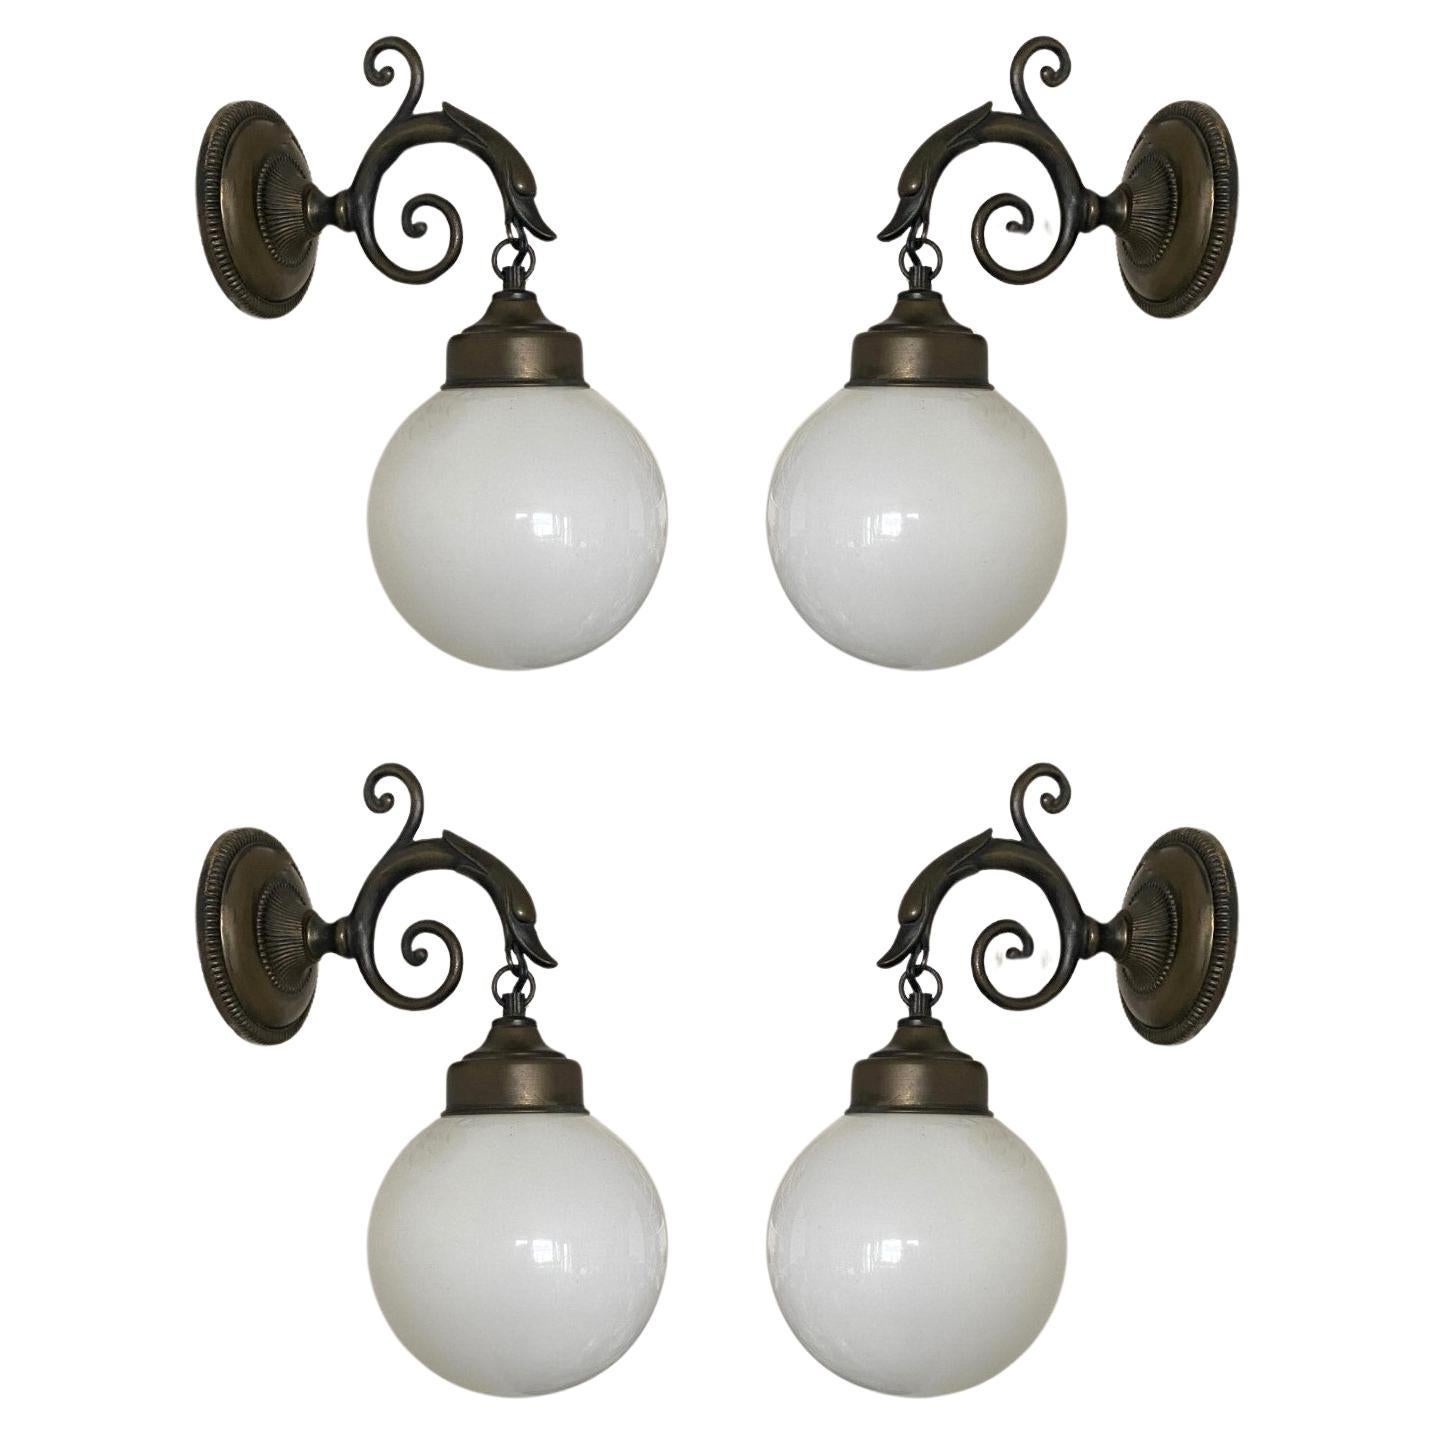 Five lovely bronzed brass bird wall sconces with opaline glass ball globes, for indoor and outdoor use, France, 1930-1939.
The wall sconces are in very good condition, beautiful patina to brass, fully functional. Each sconce takes one 
Edison E14